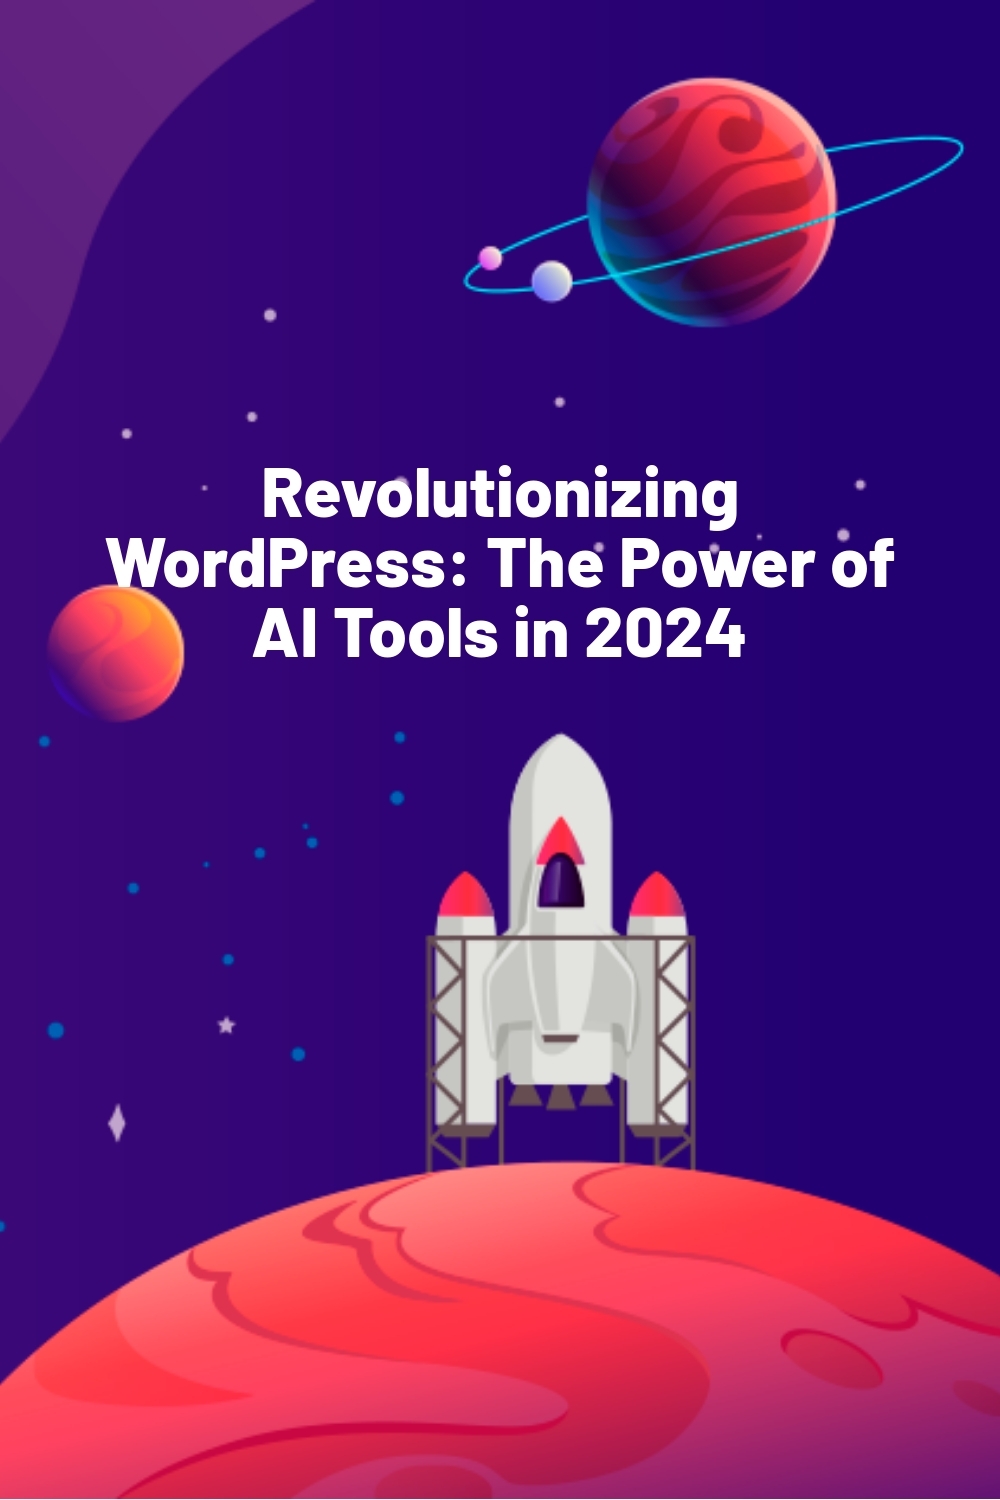 Revolutionizing WordPress: The Power of AI Tools in 2024